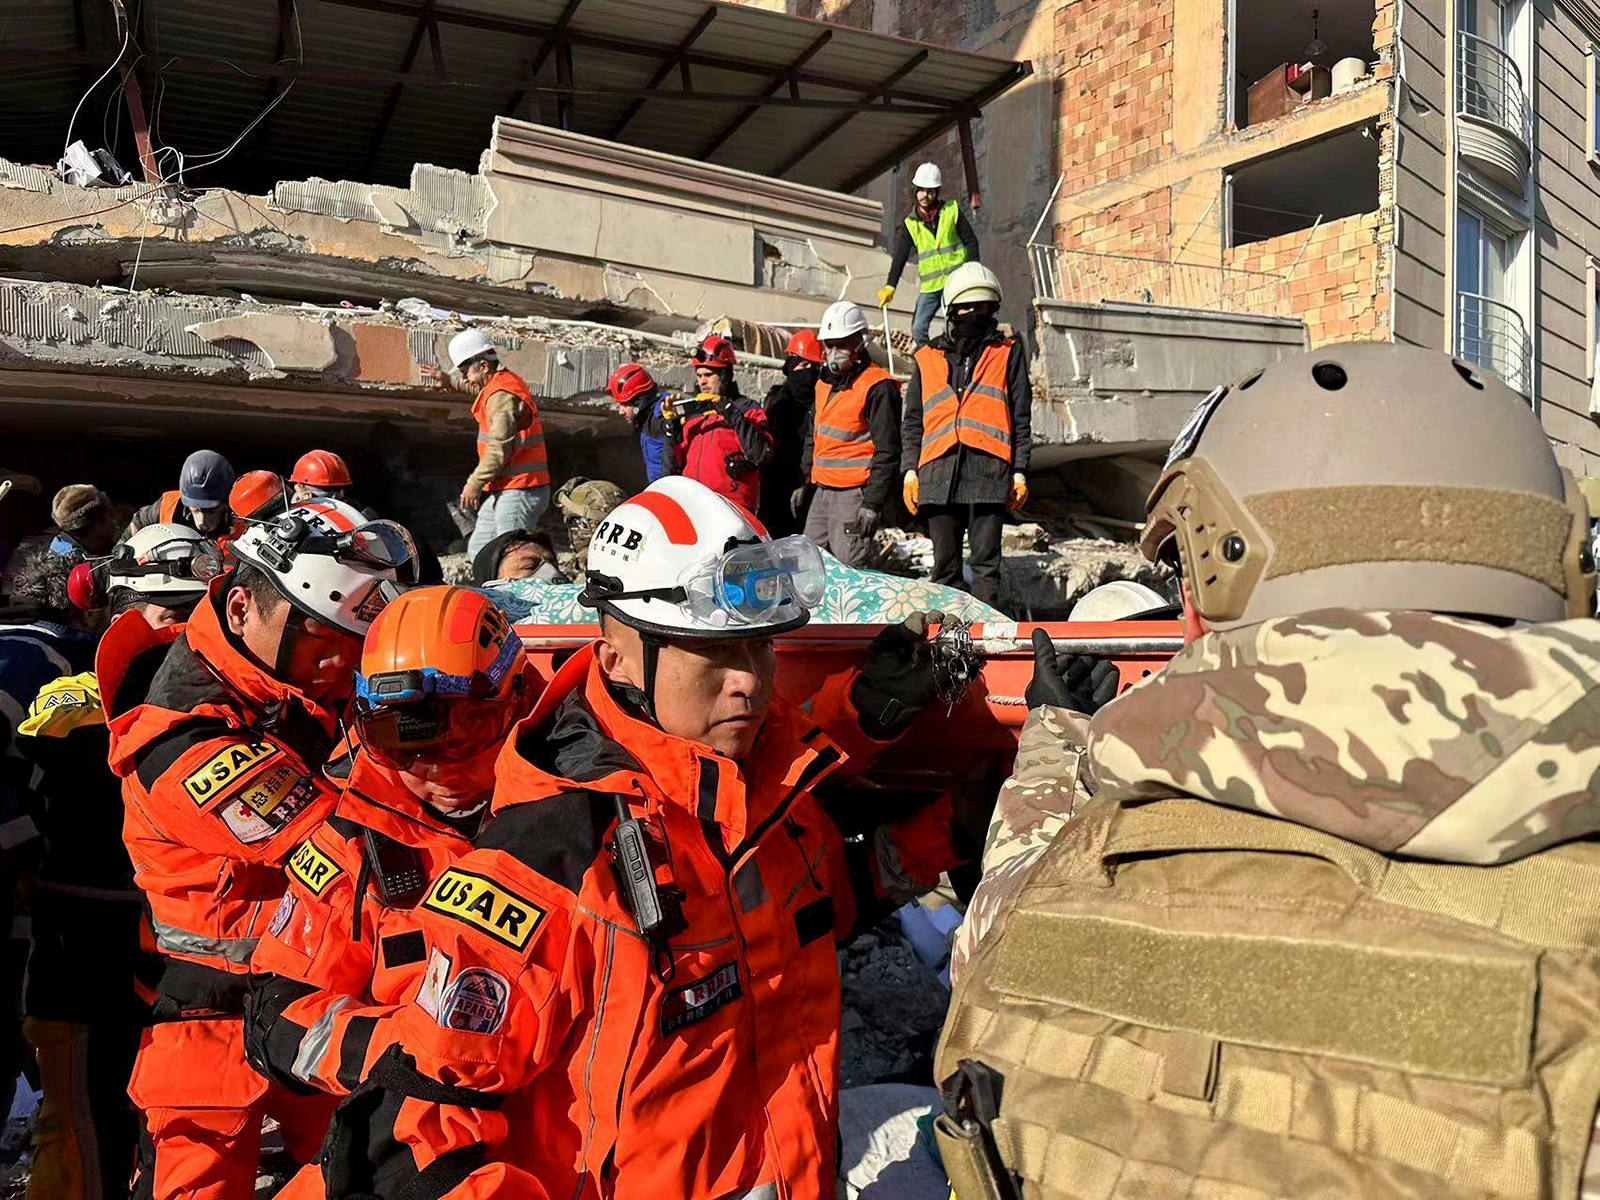 Members of rescue teams work to free survivors from a heavily damaged building in Belen Town of Iskenderun City, in southern Turkey's Hatay province, on February 9.